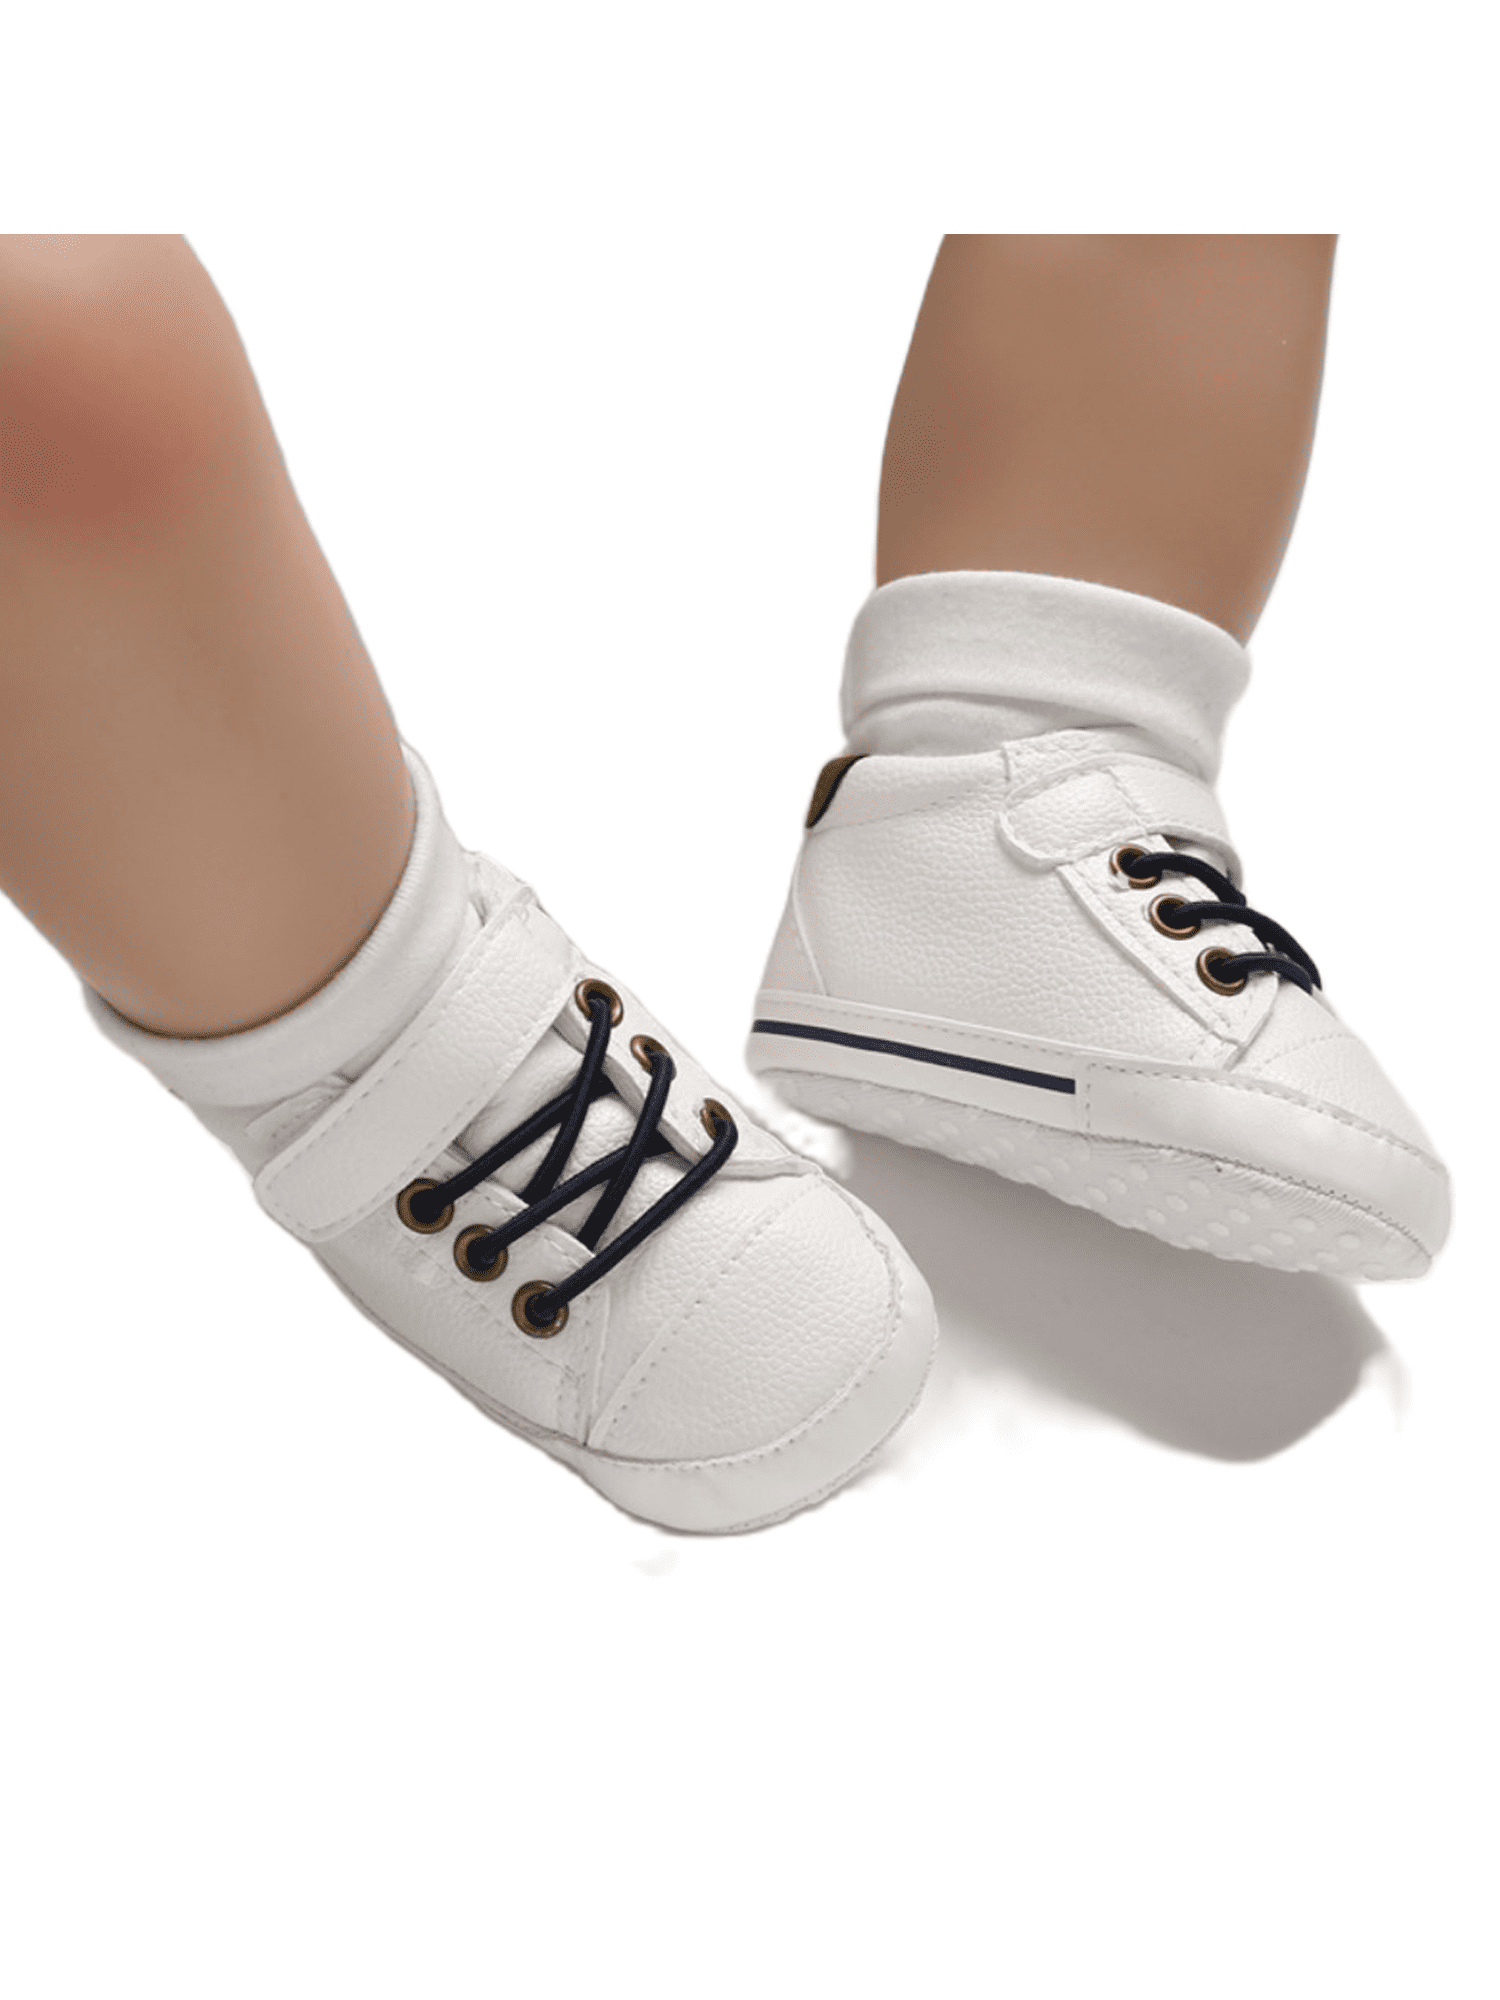 Newborn Baby Bandage Cotton Shoes Toddler First Walkers Kid Shoes Sneaker CA